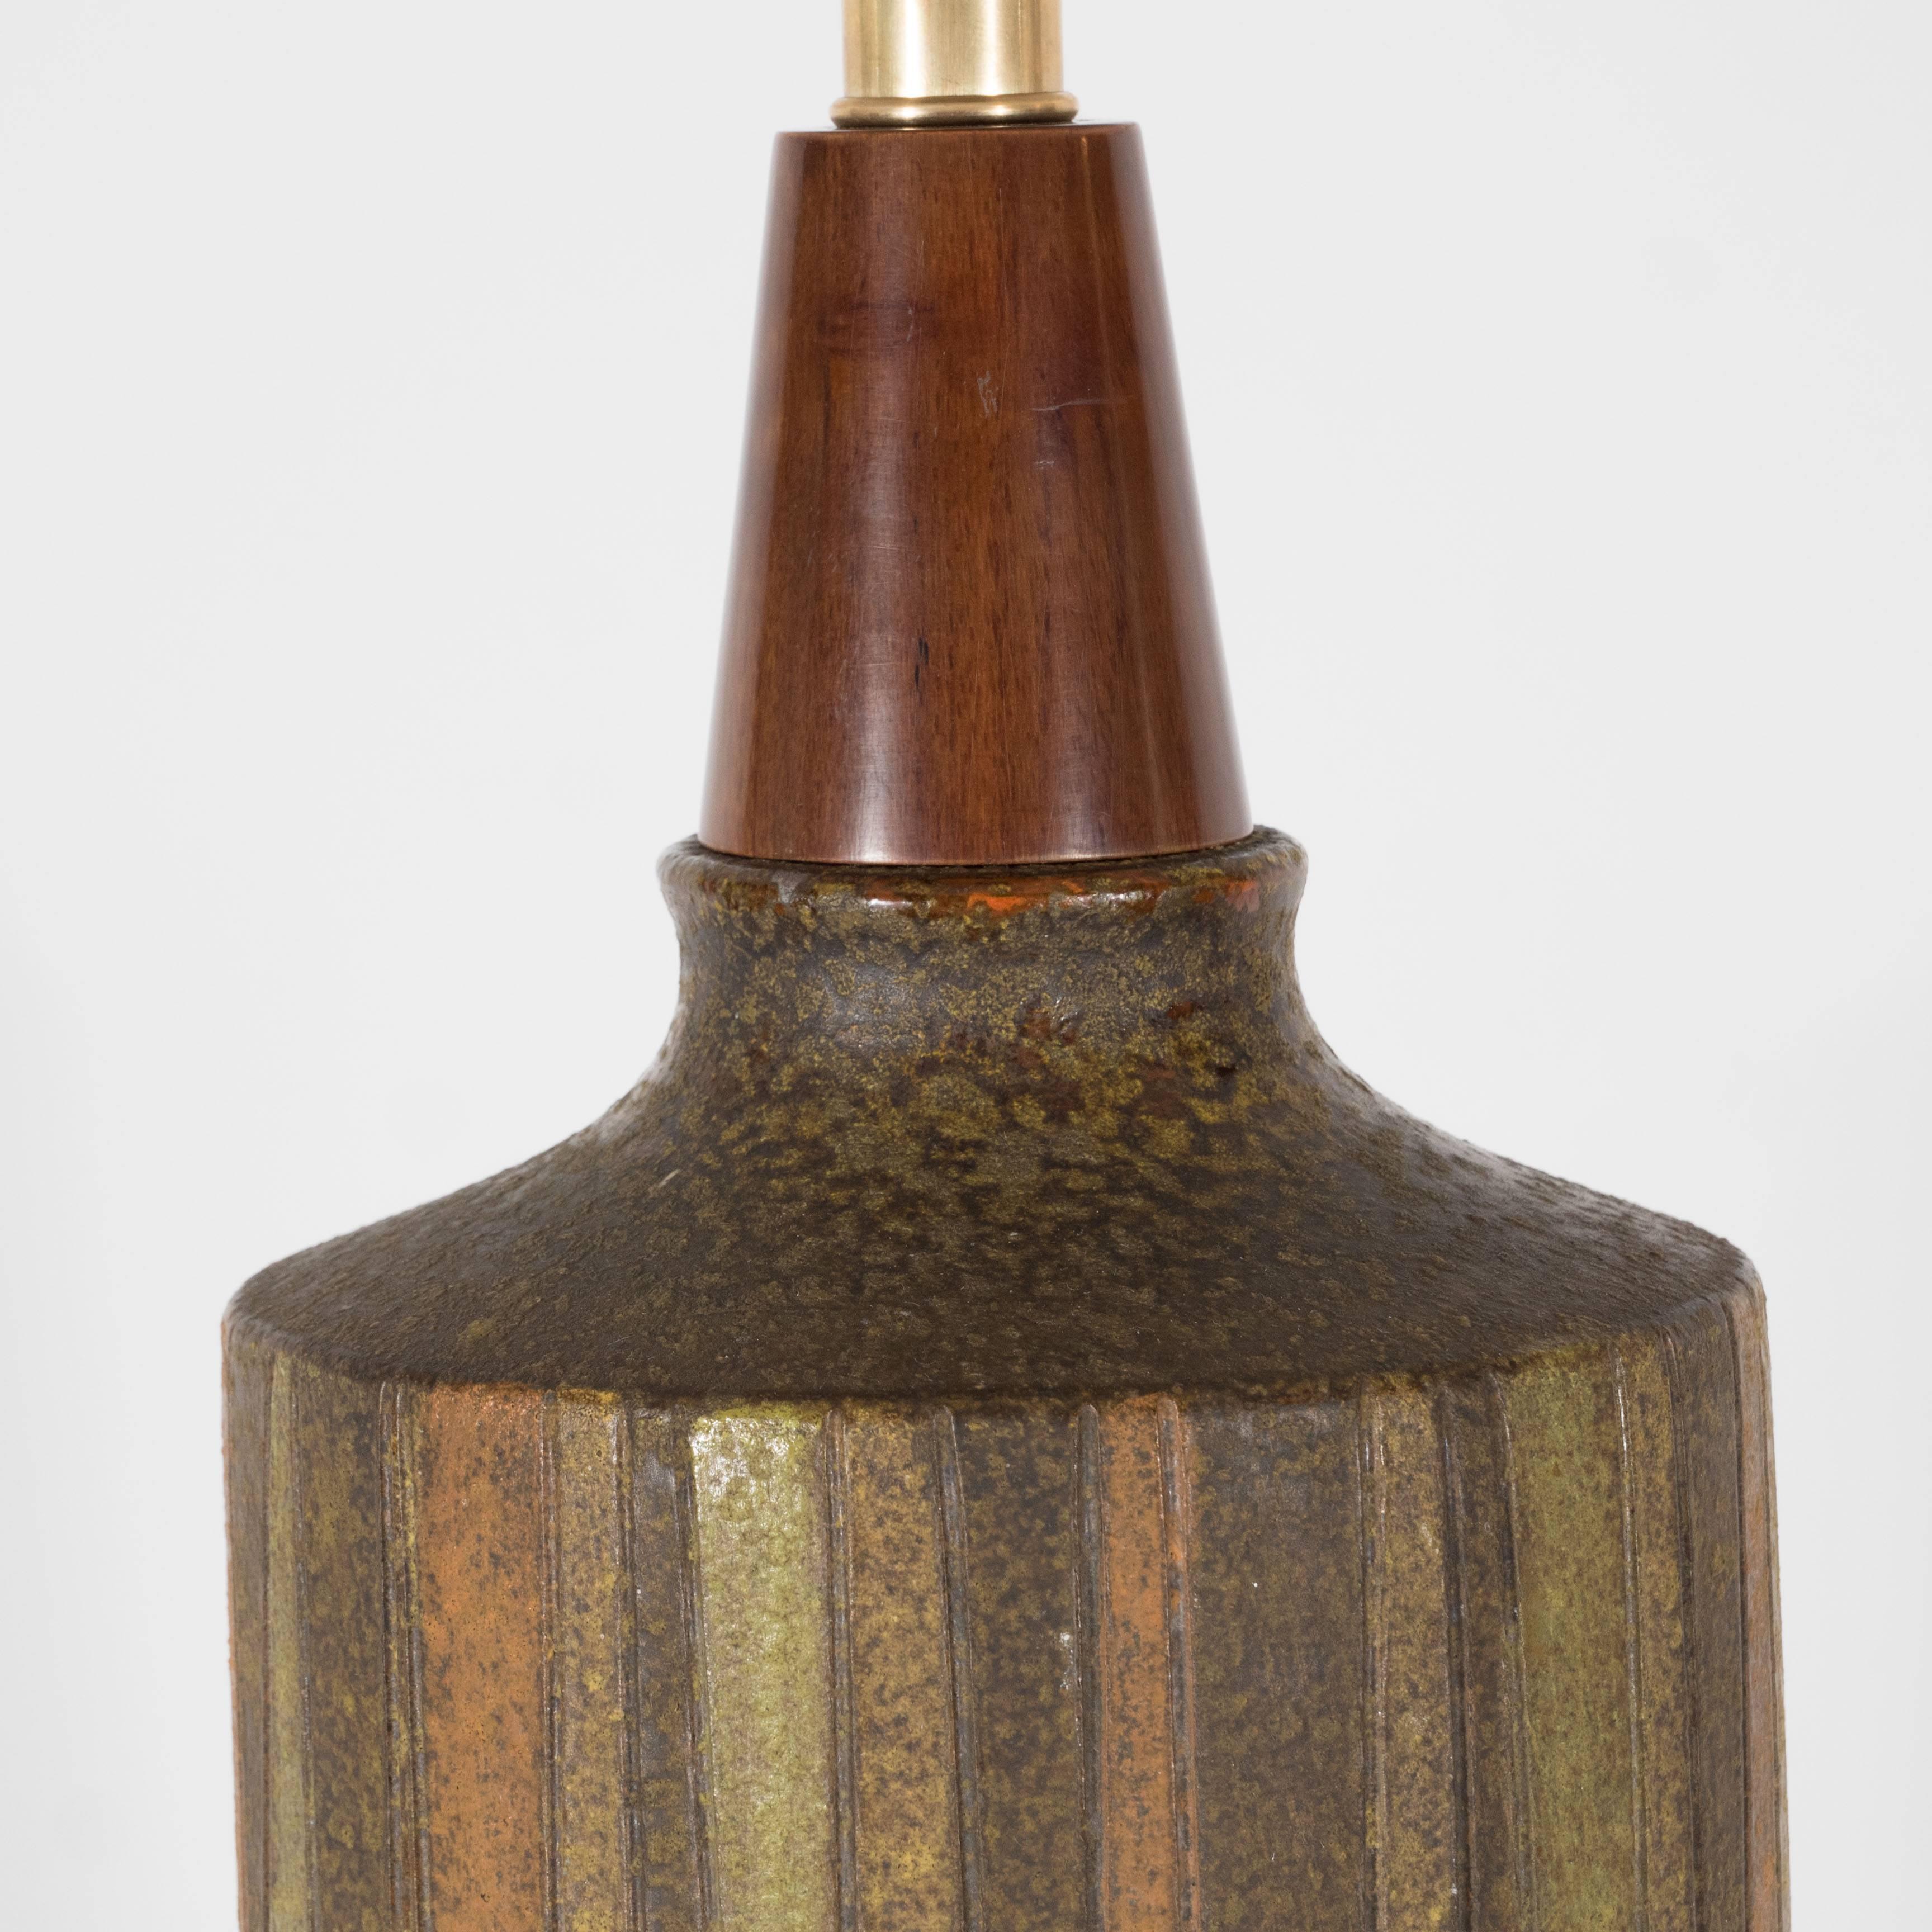 American Mid-Century Organic Modern Ceramic & Walnut Table Lamp in Earth Tones by Bitossi For Sale